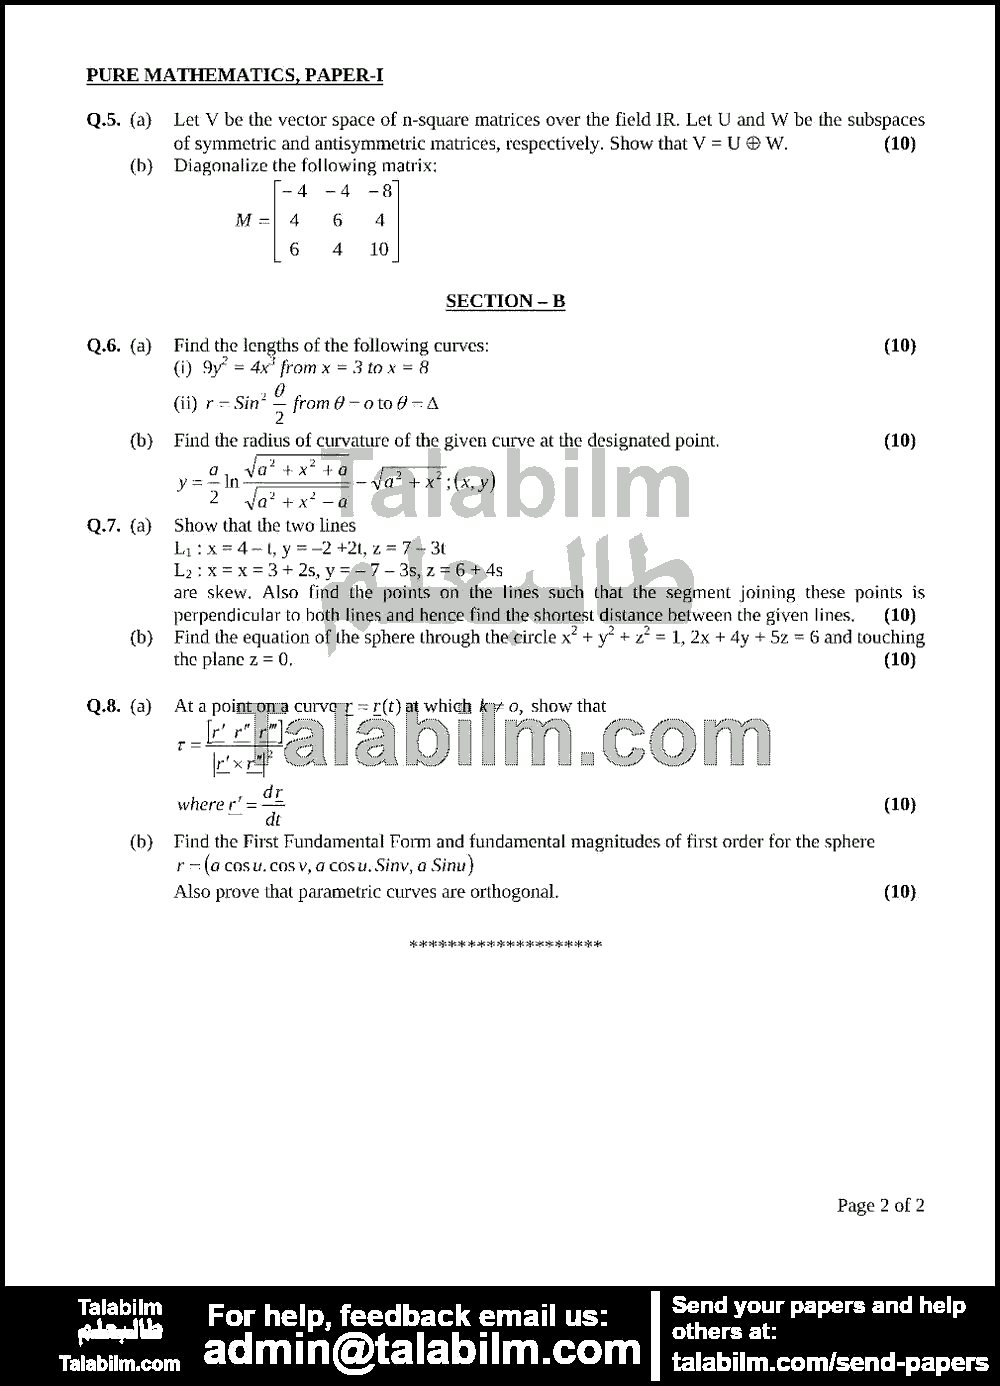 Pure Mathematics 0 past paper for 2009 Page No. 2